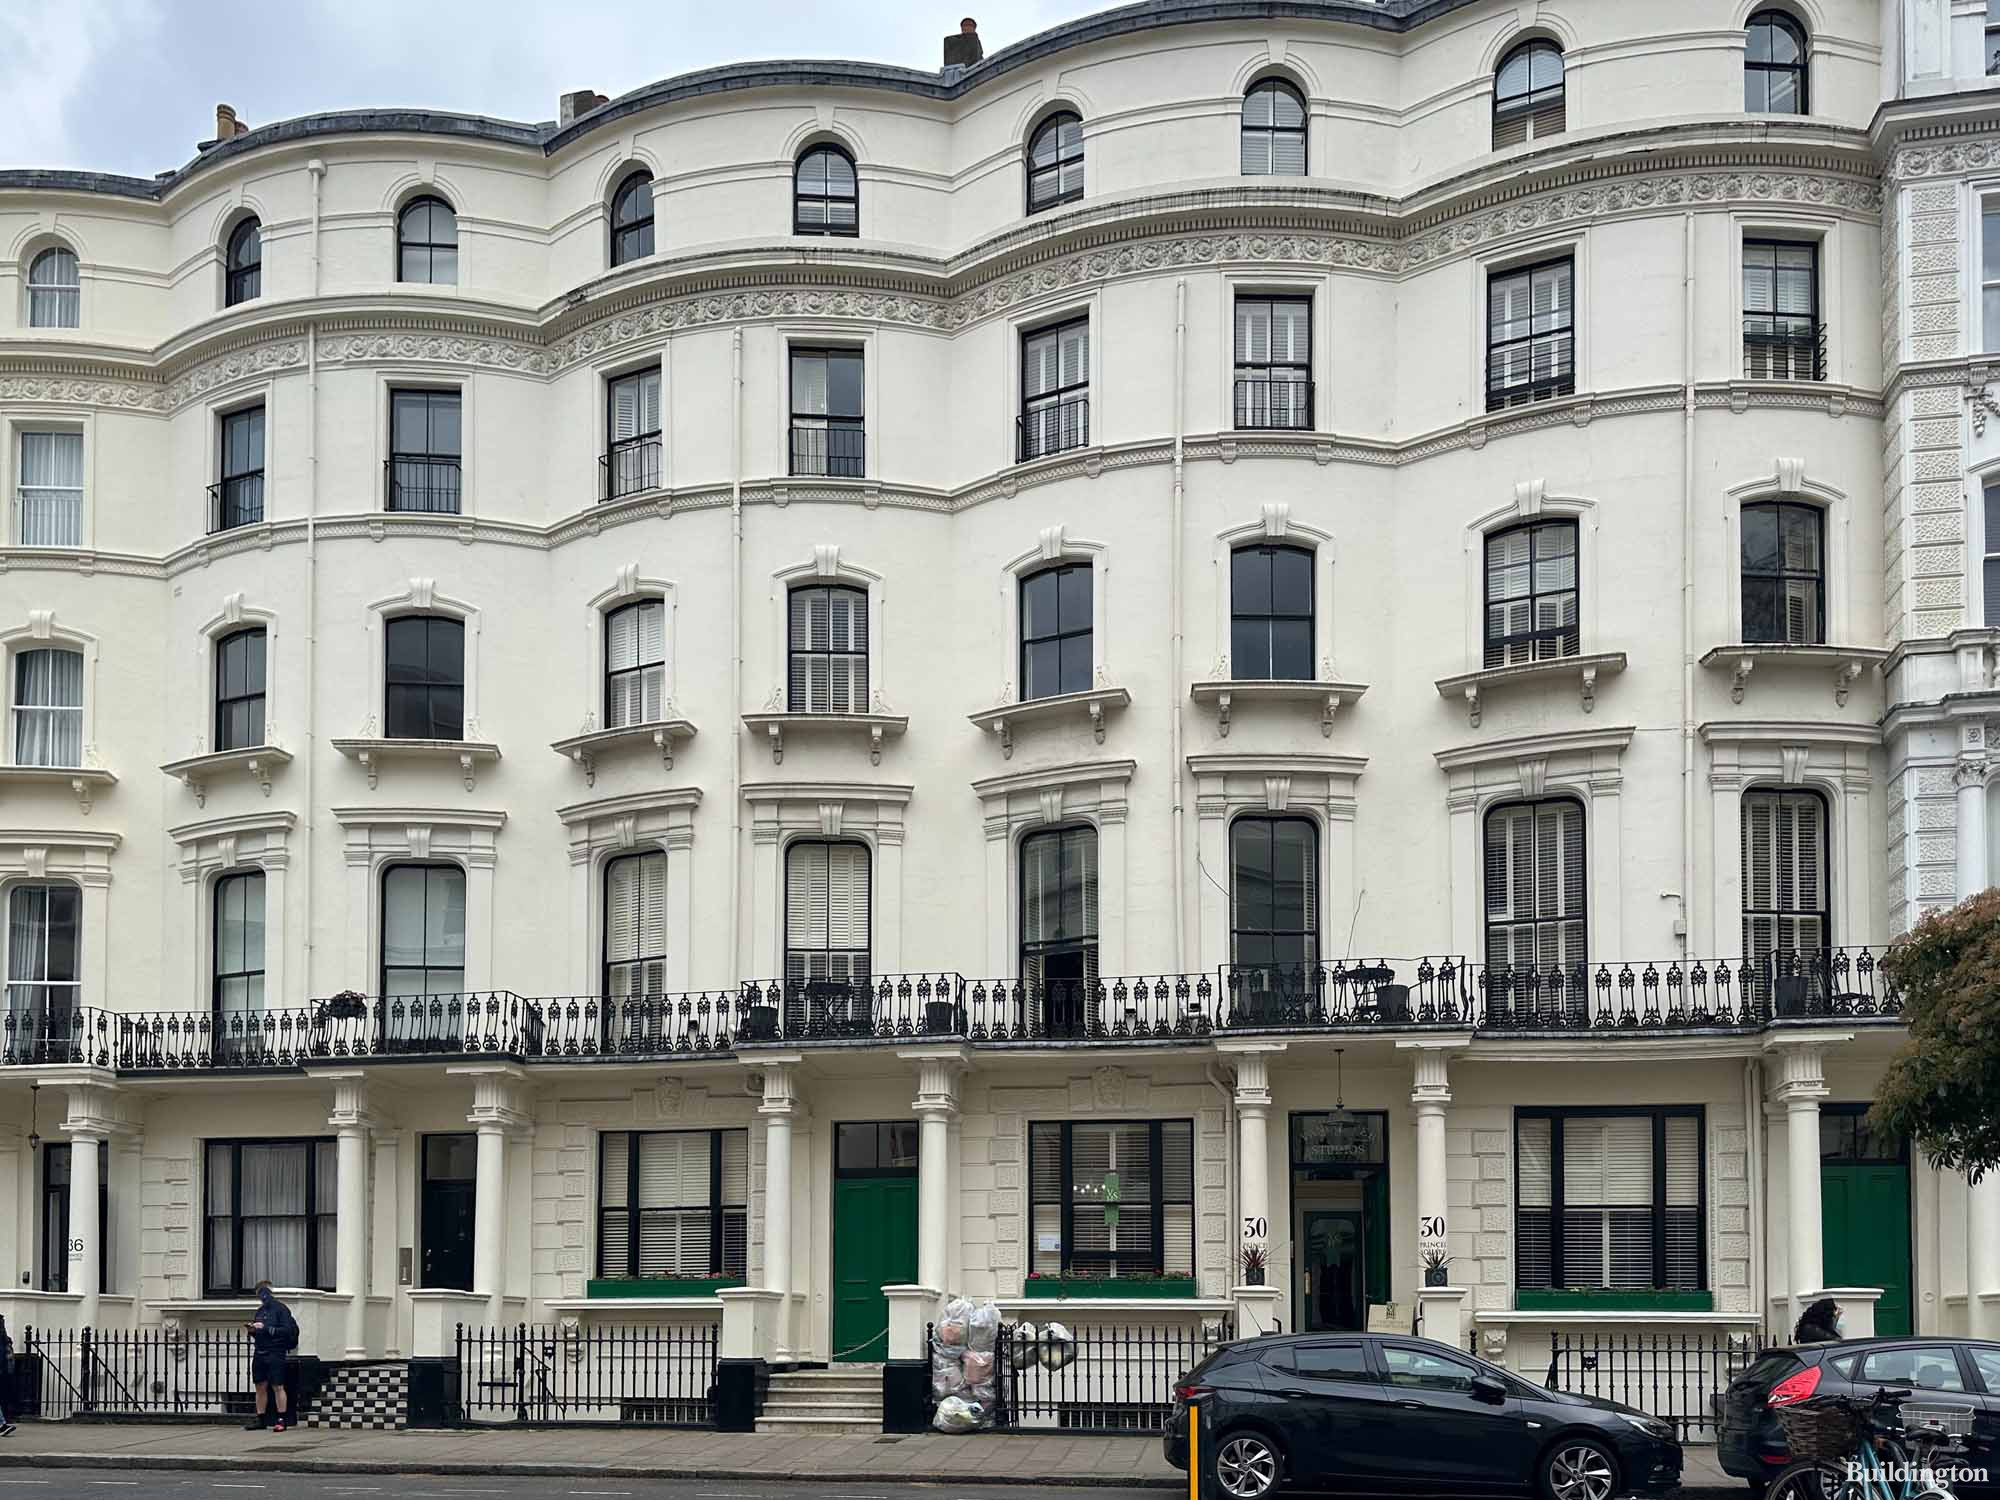 30 Prince's Square terraced house in Bayswater, London W2